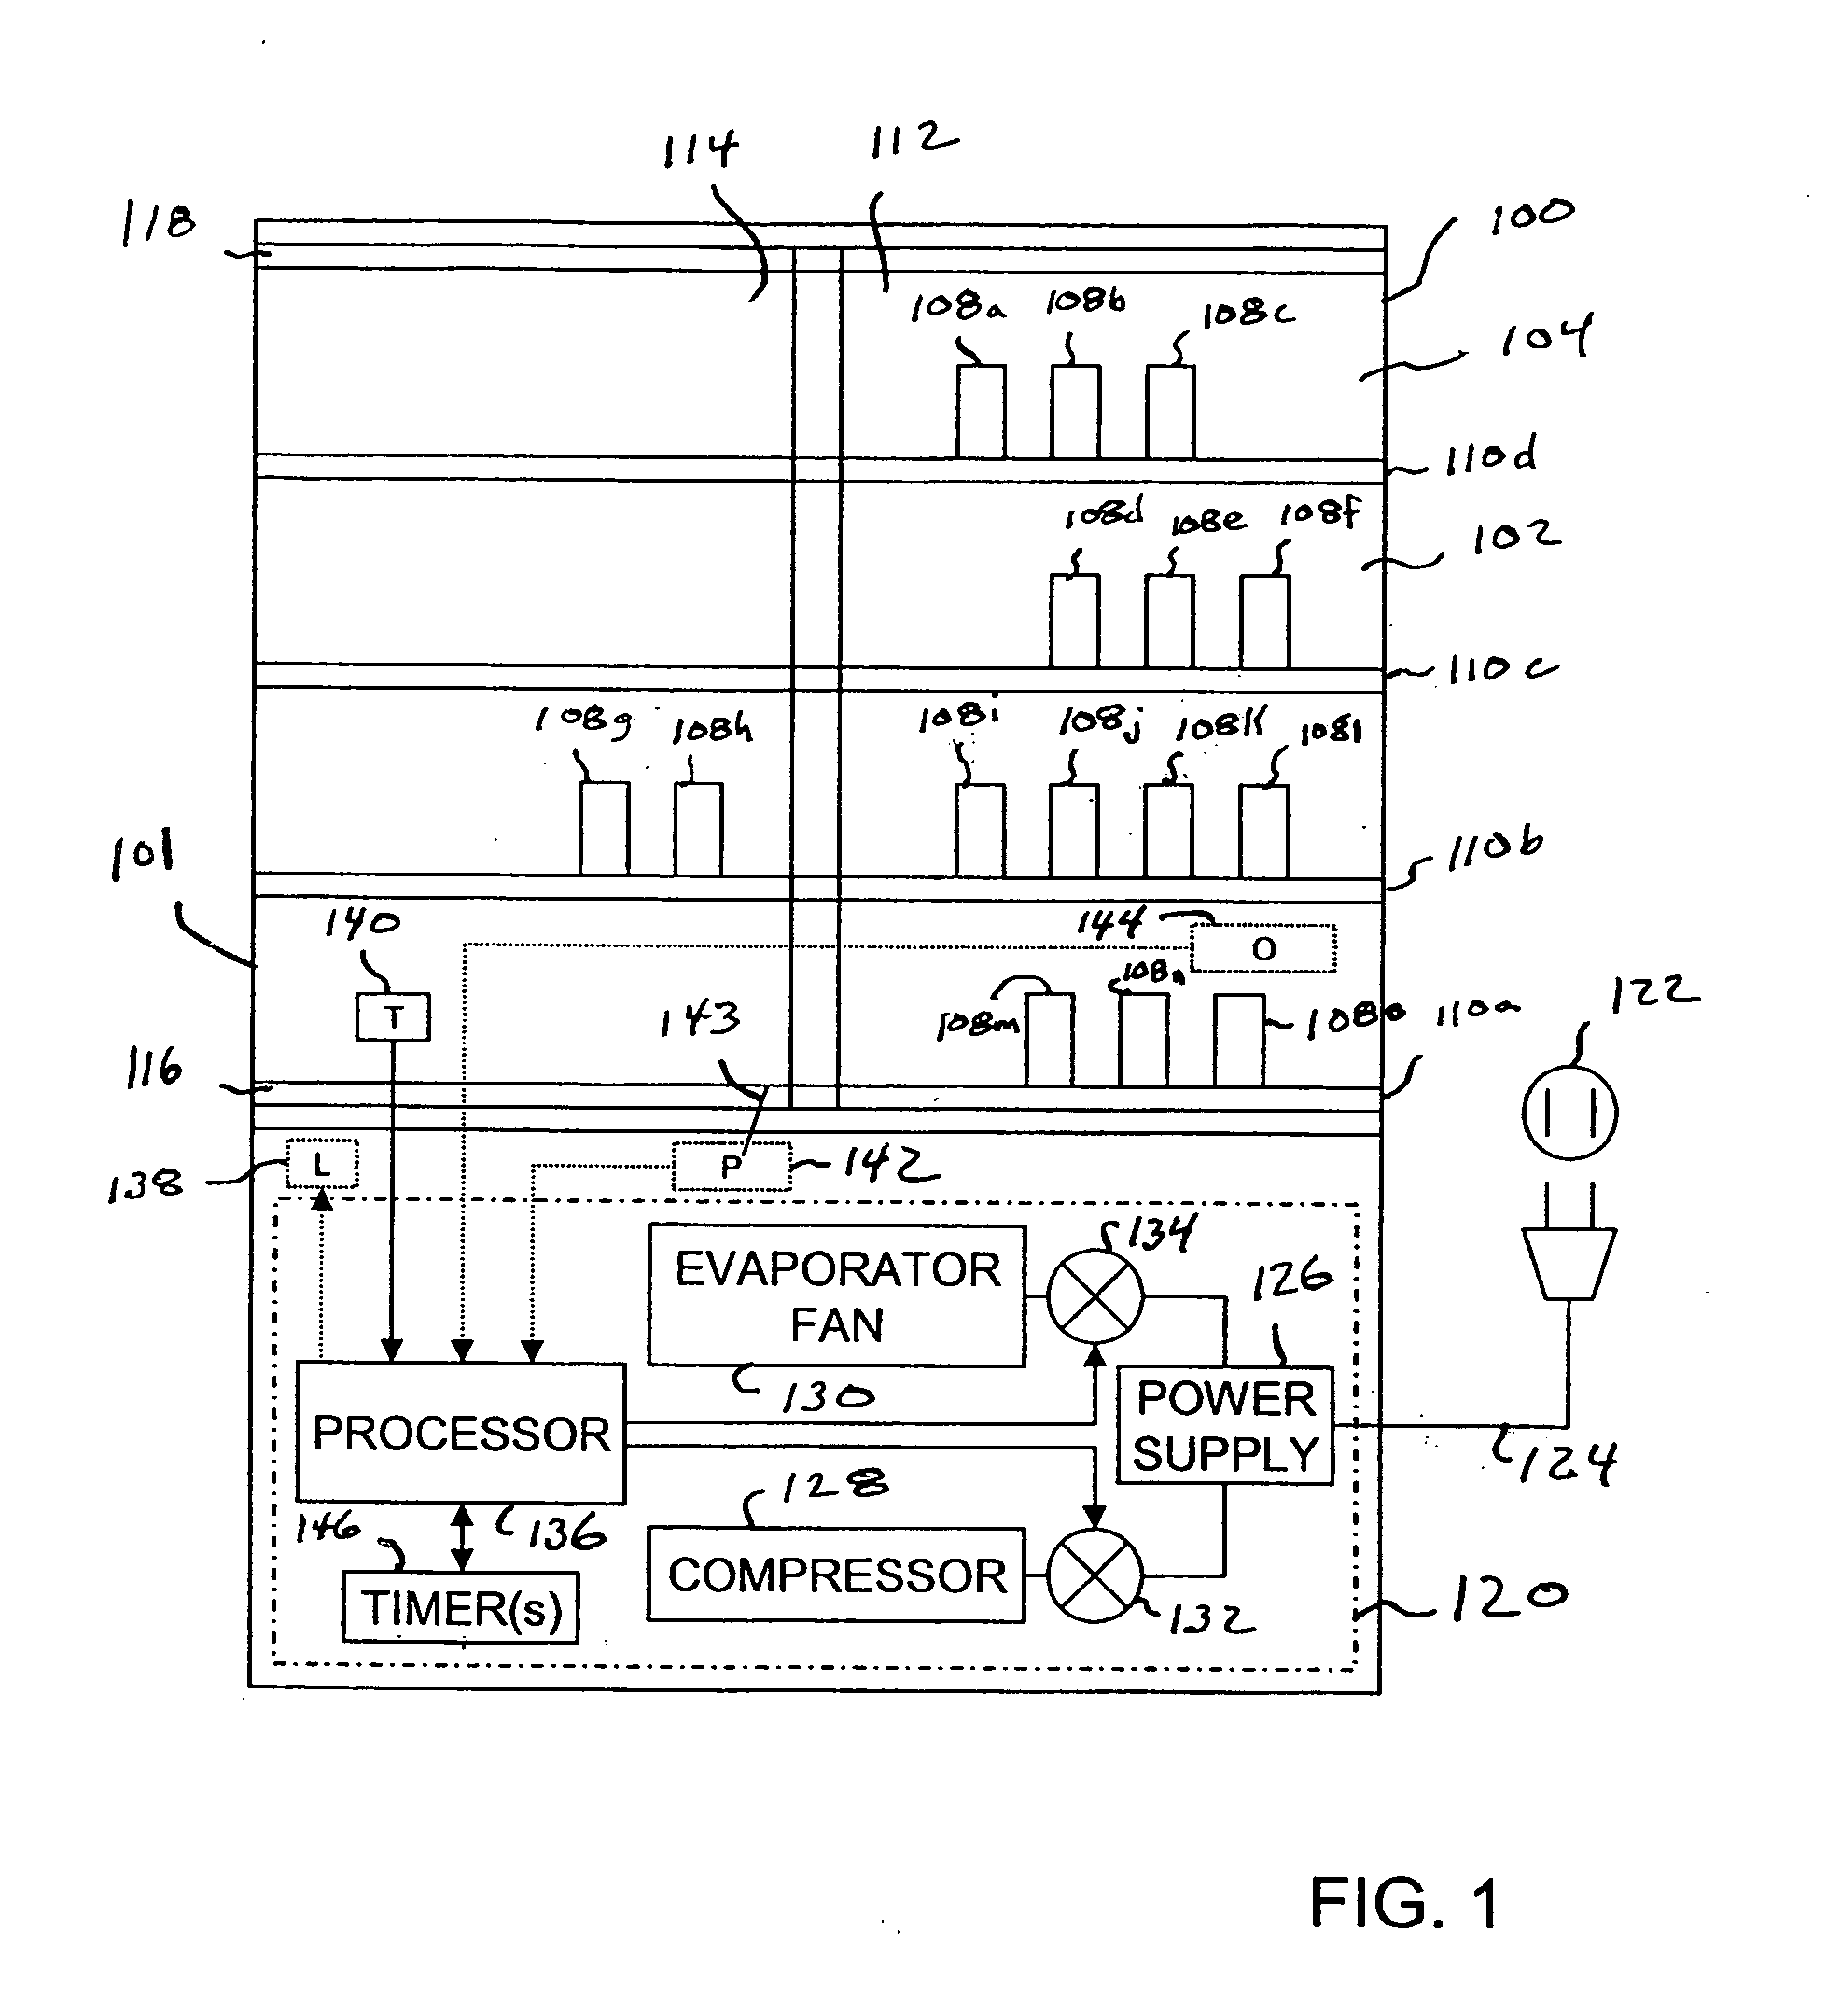 Method and apparatus for power management control of a cooling system in a consumer accessible appliance